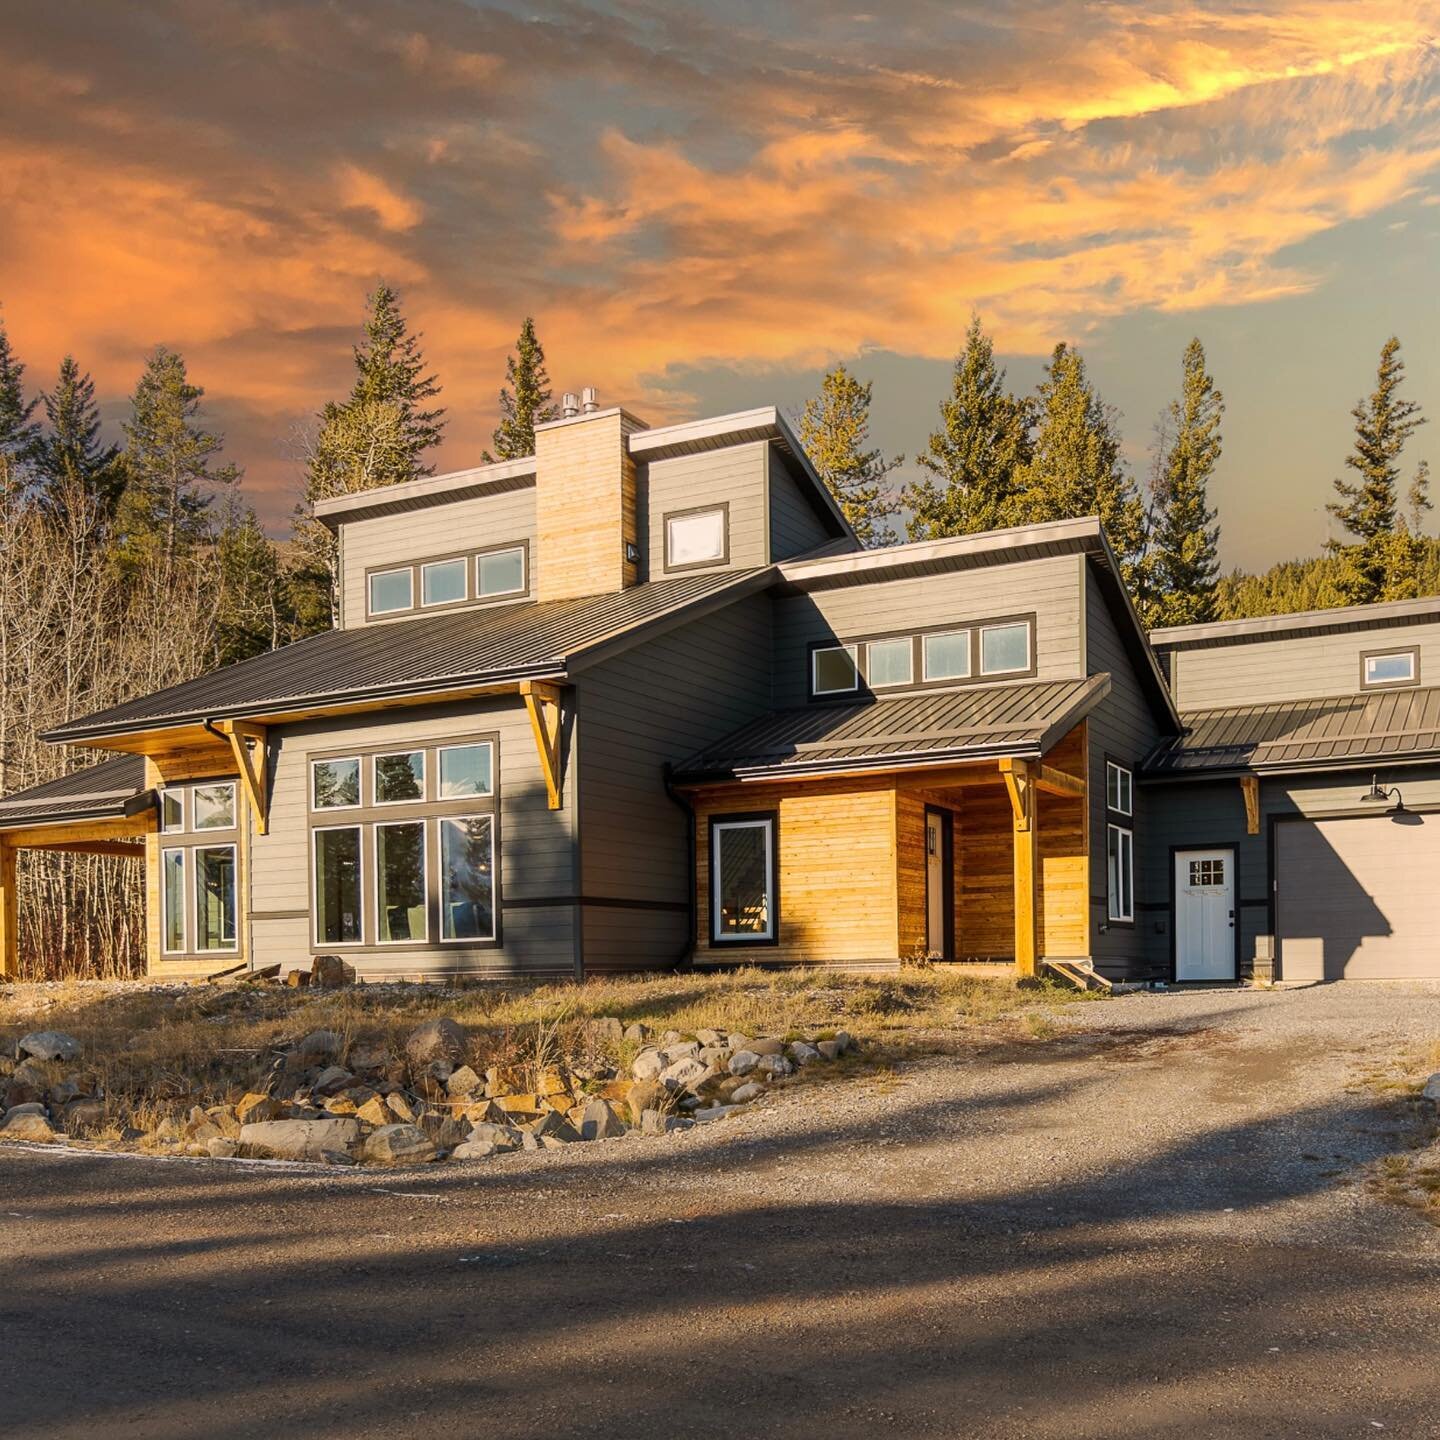 We had the opportunity to spend the day in the Crowsnest Pass staging this unique home.  This beauty combines cozy cabin vibes with striking modern features and stunning views.  We had such a blast and are so happy with the results.

Contact @kurtish